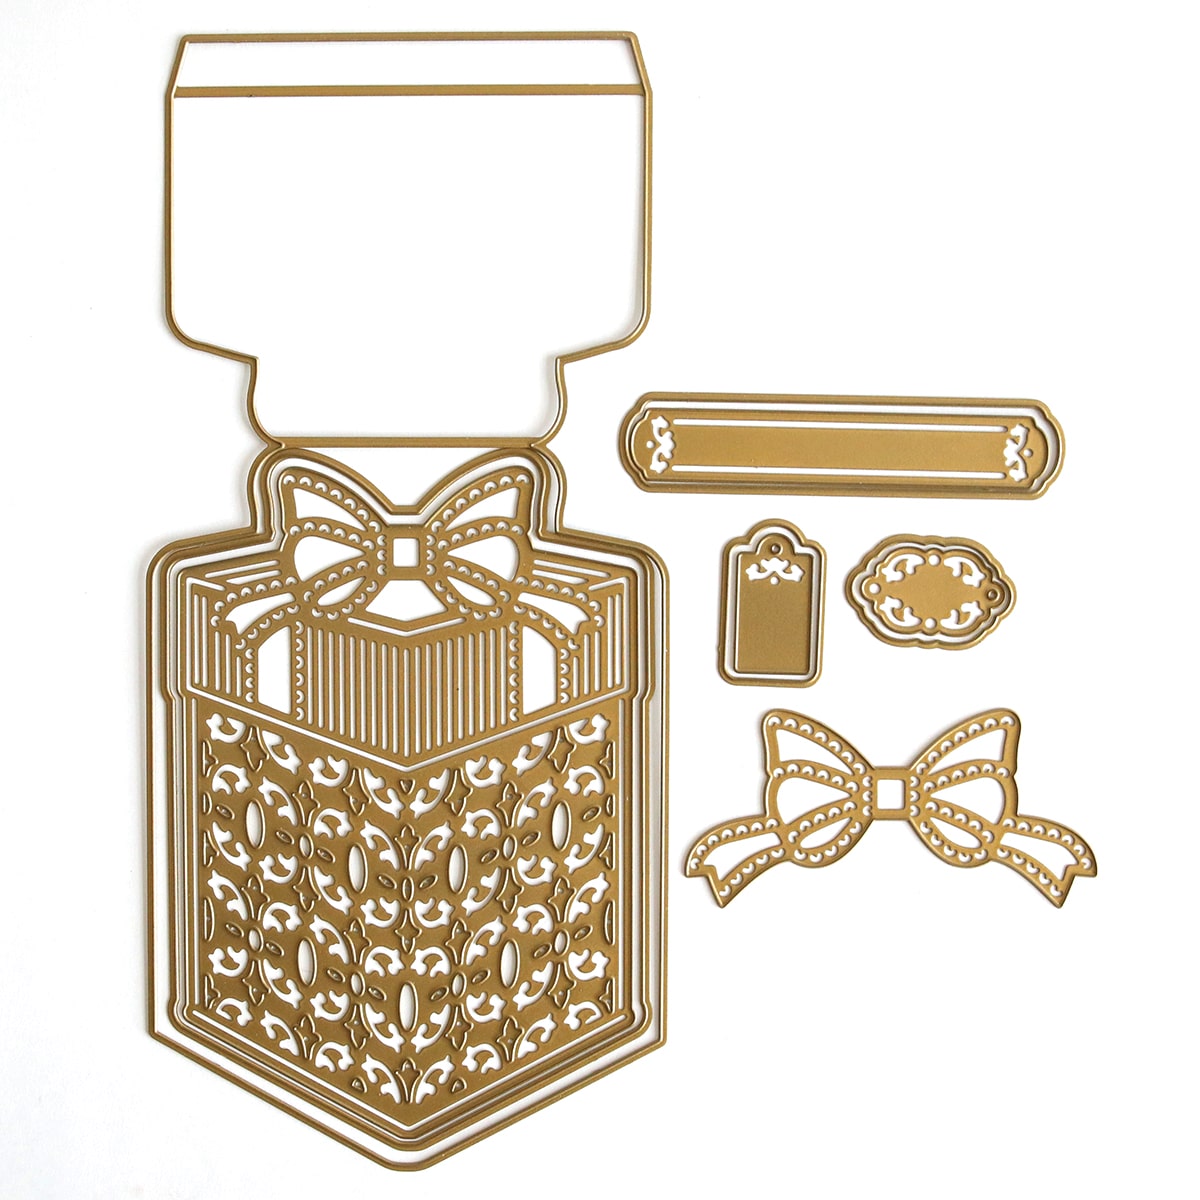 A Perfect Present Easel Die with a bow and bows on it.